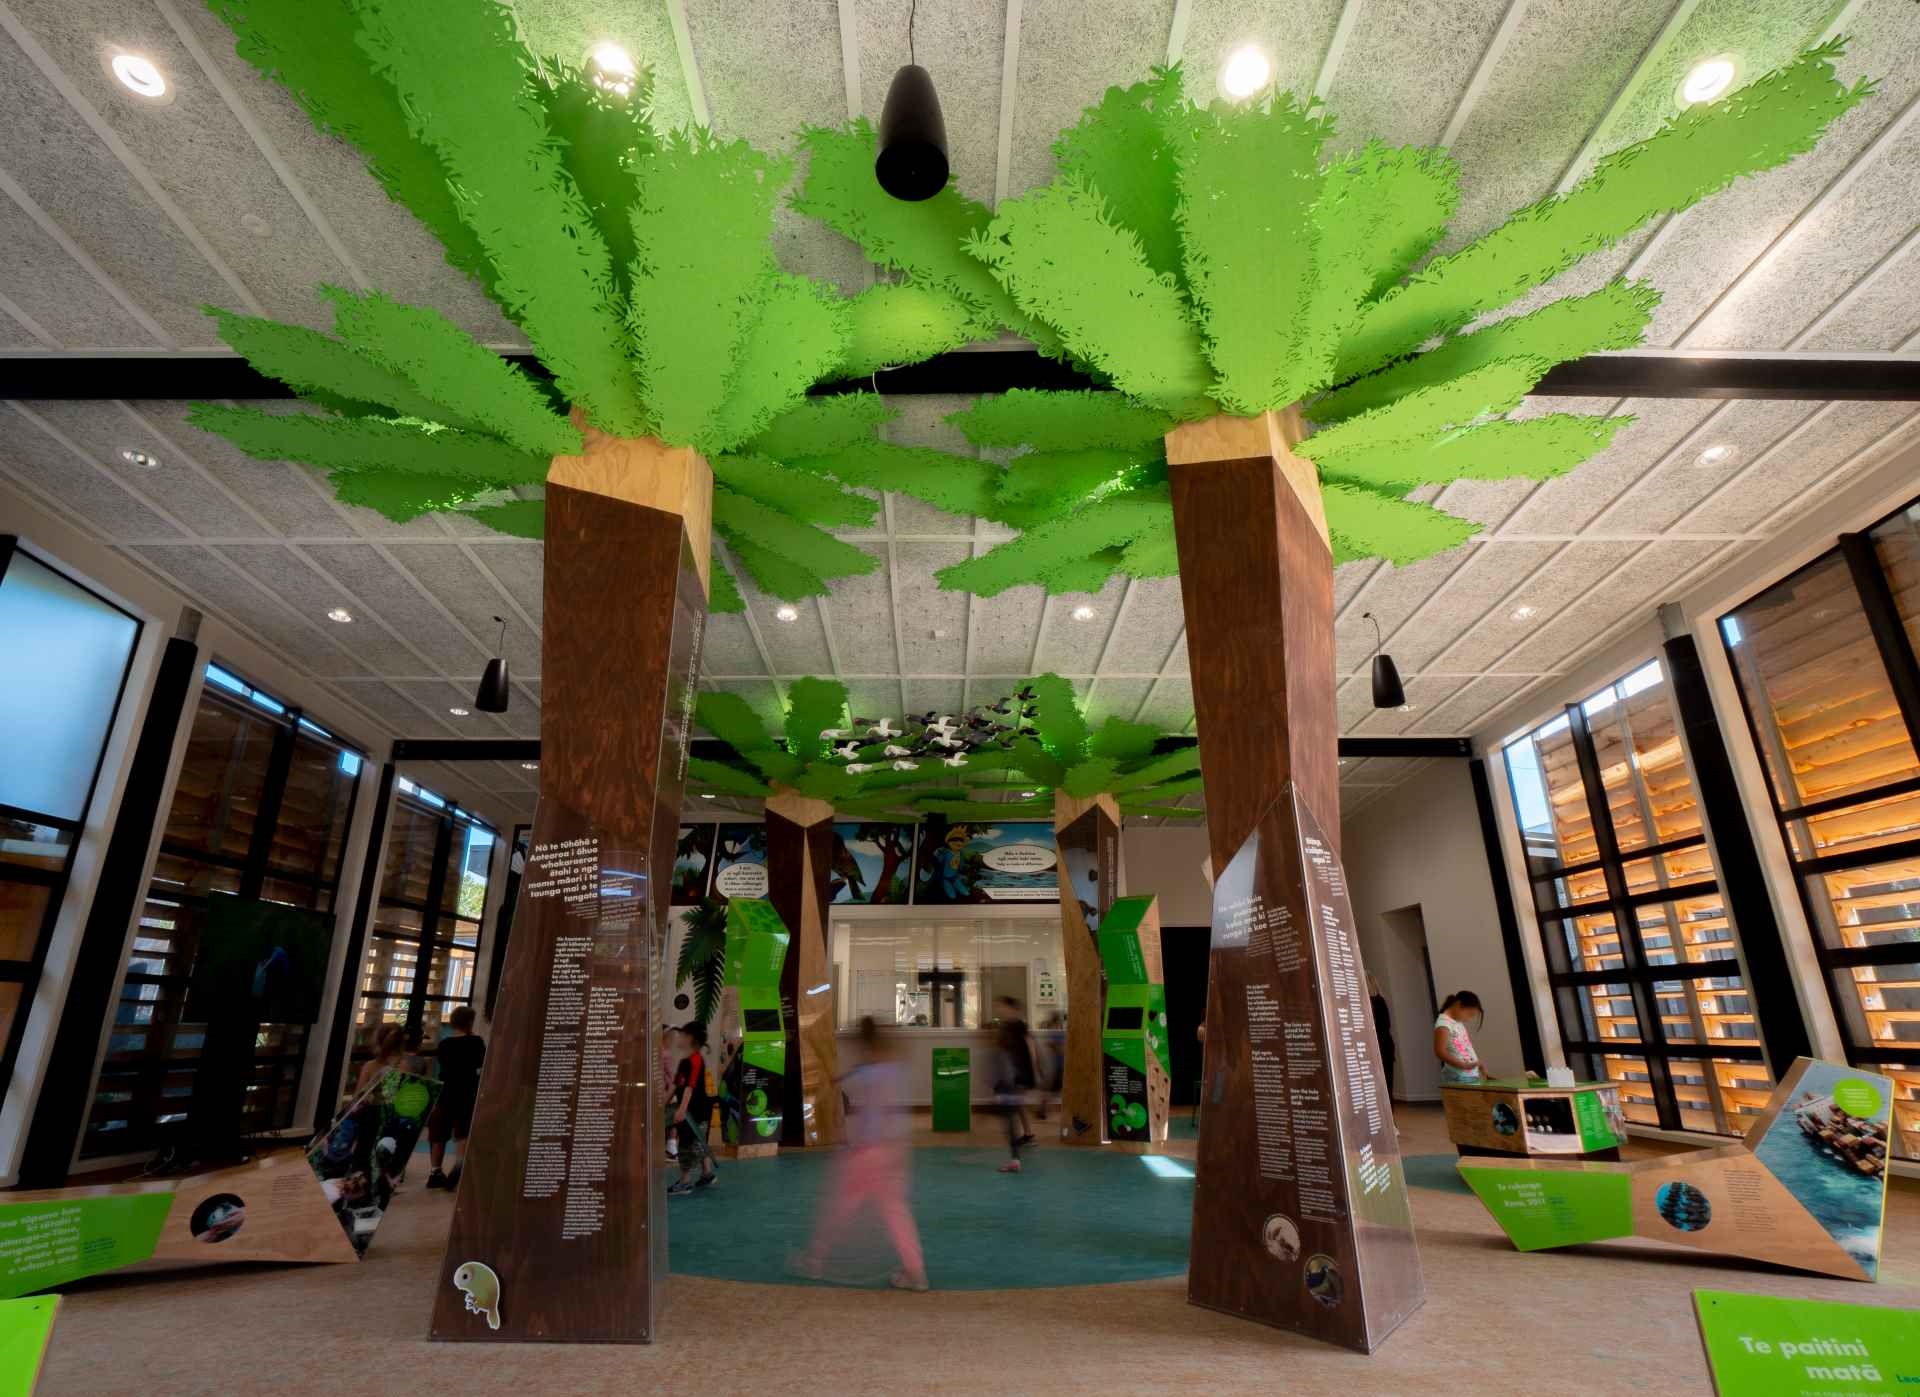 Children inside the education centre, which is fitted out with playful sculptures of trees and birds.